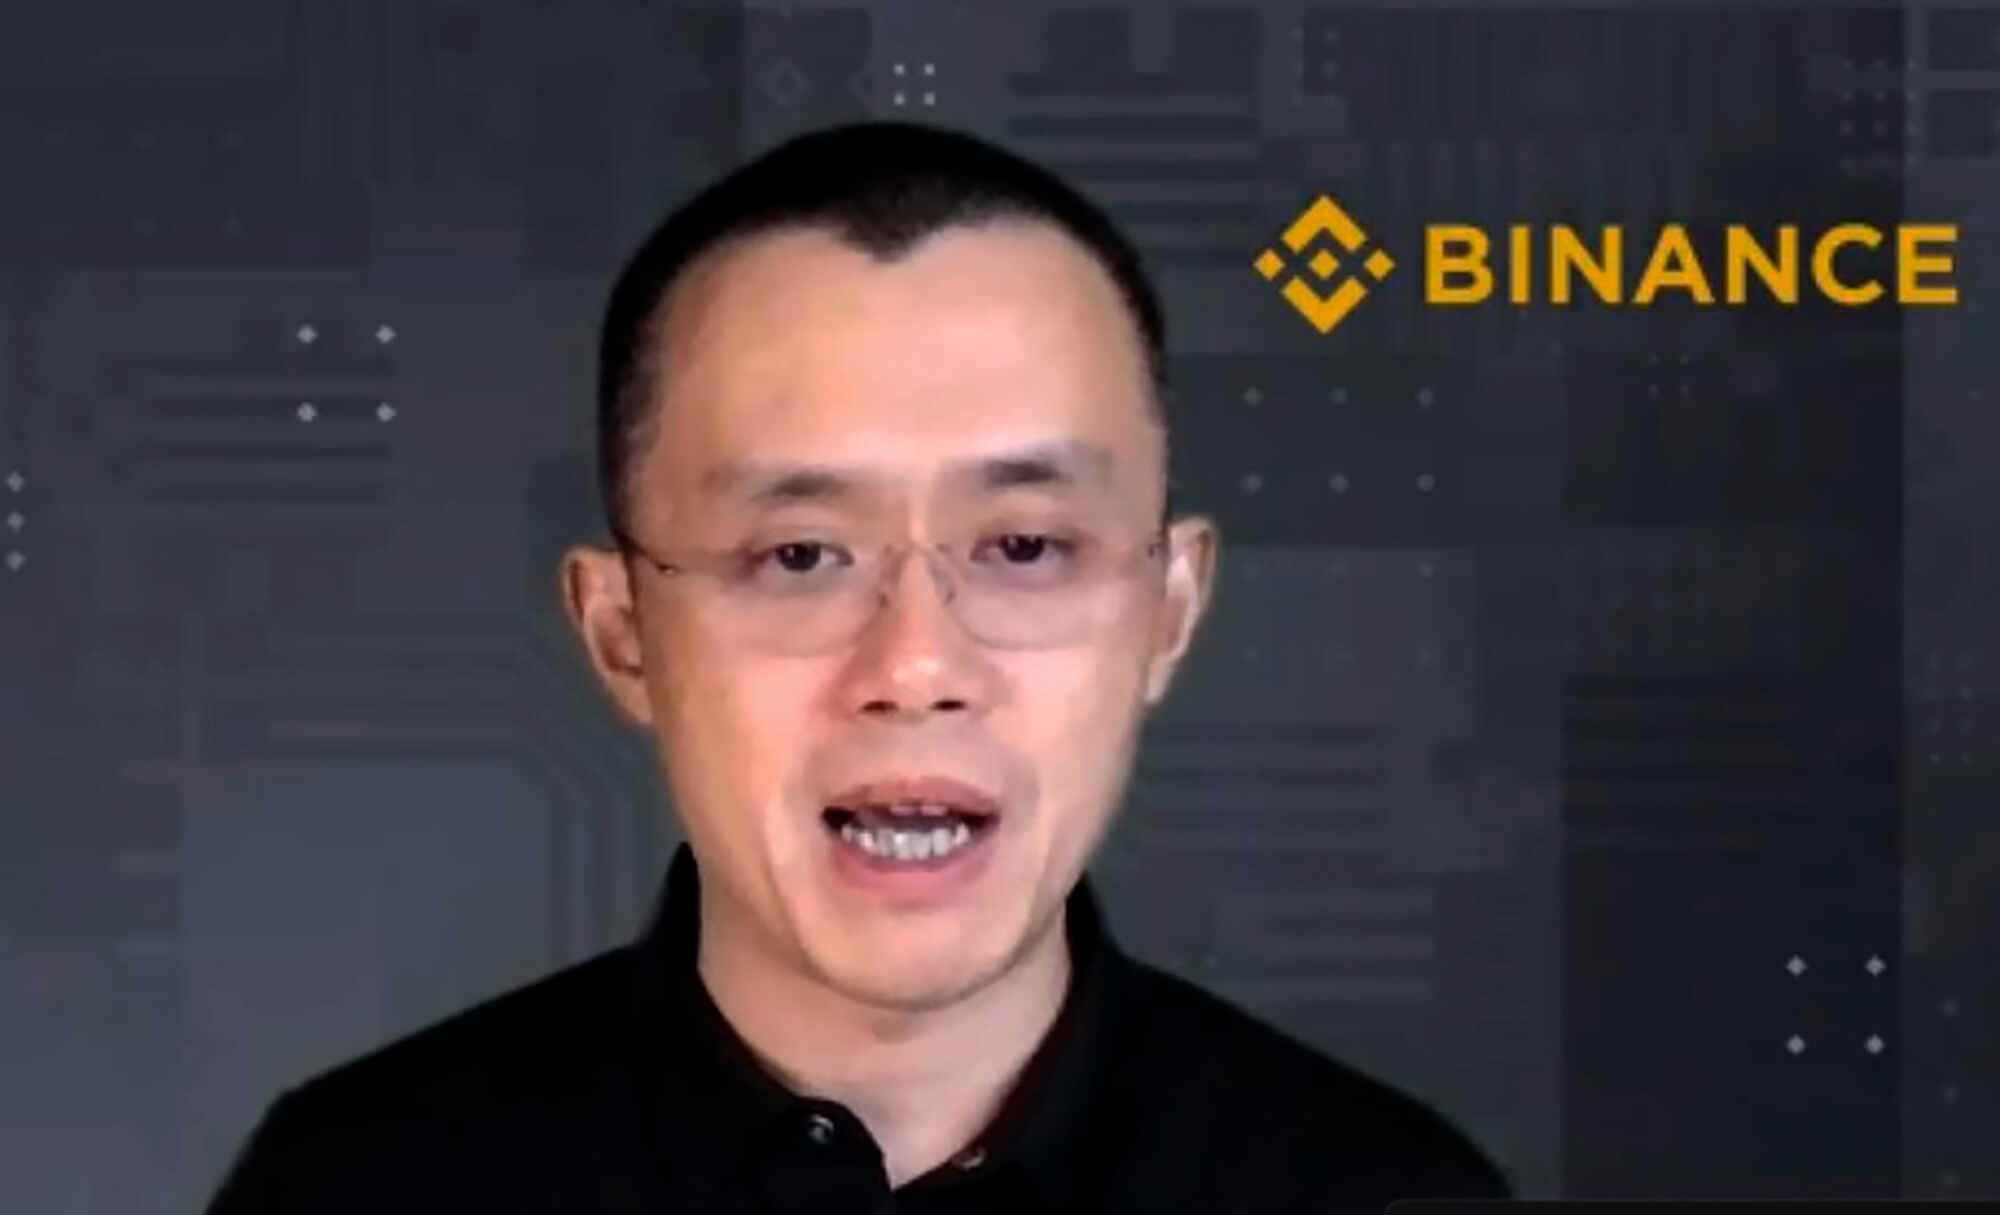 Binance, the world’s largest cryptocurrency exchange, will pay $4 billion in fines to the US government, while founder/ CEO Changpeng Zhao will resign. (AP Photo/File)